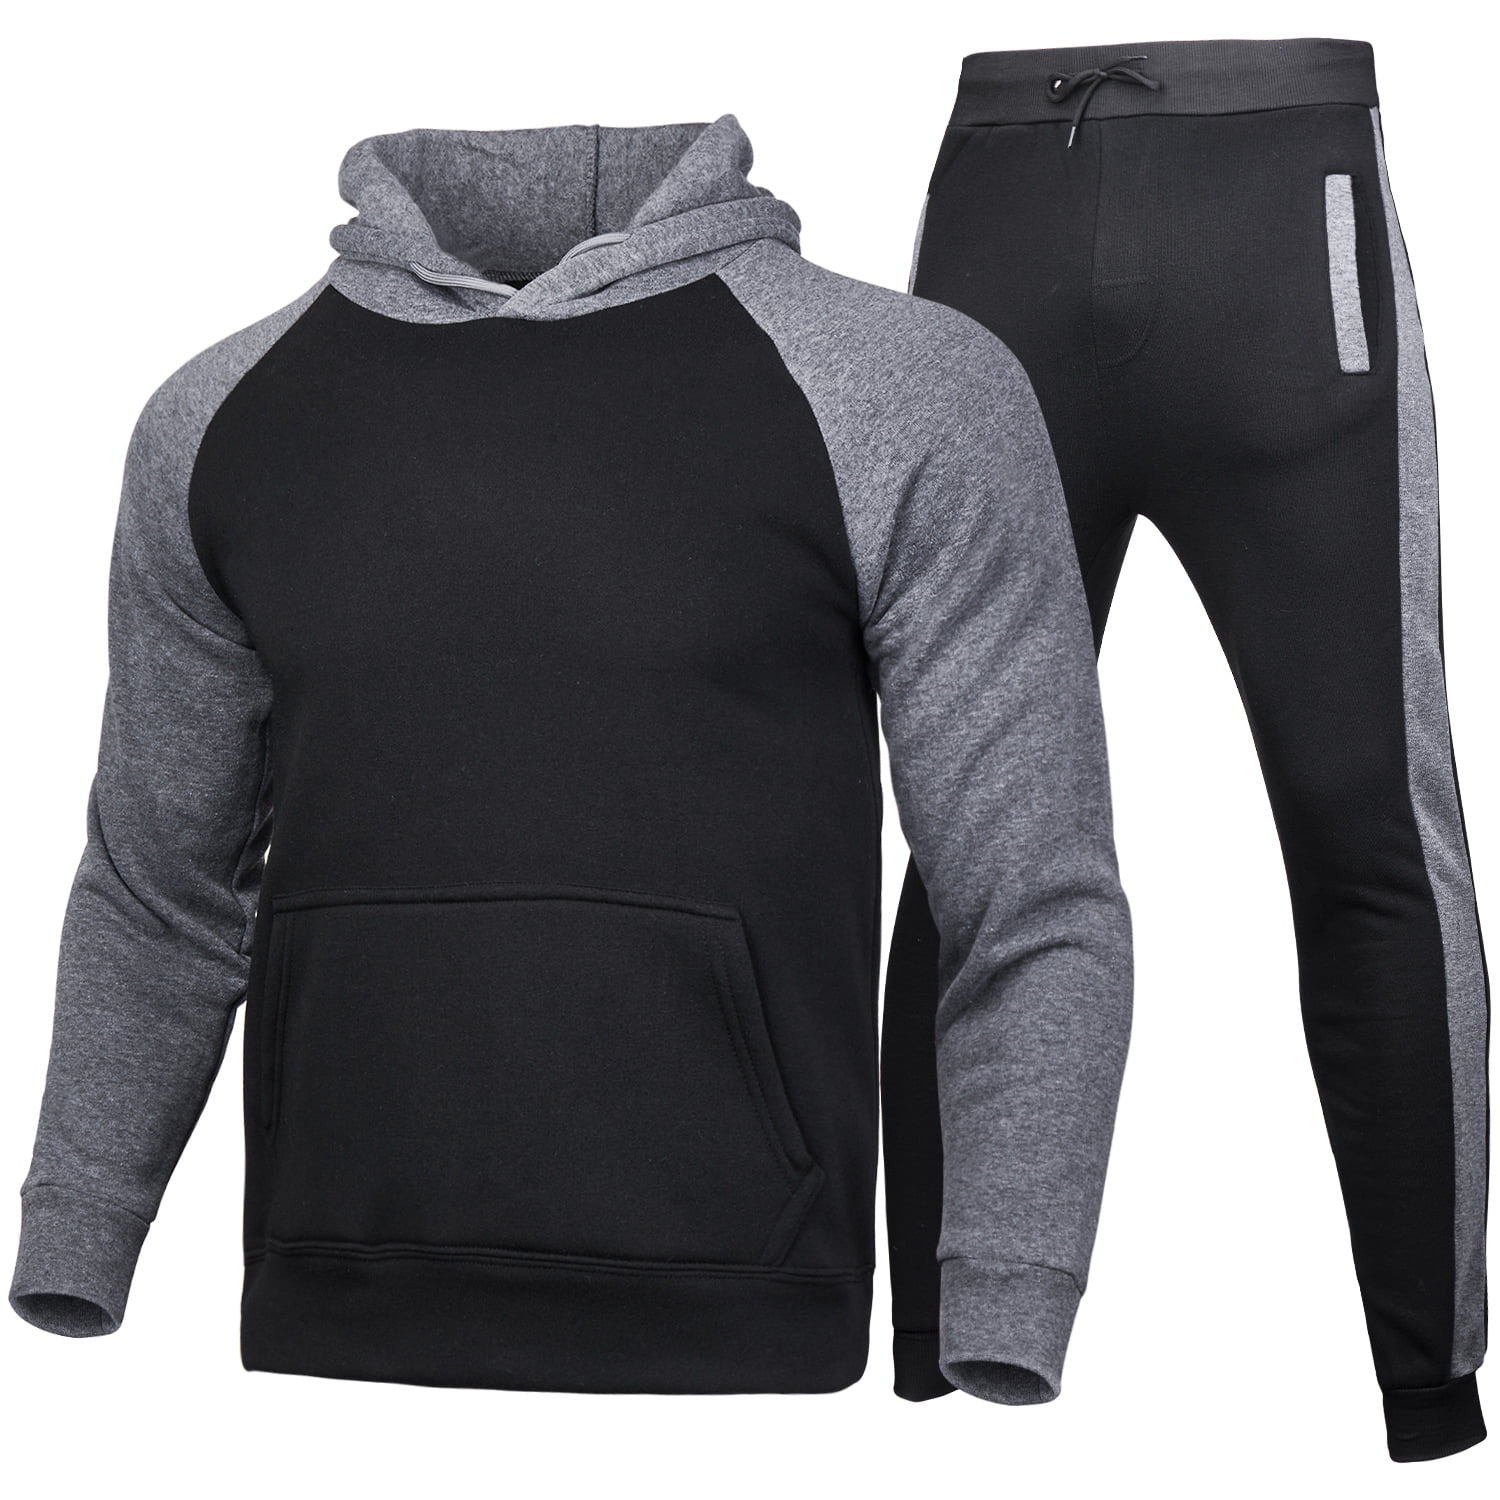 Men's Casual Pullover Jogging Tops Tracksuit Sets Sweater Running Sports Suit 